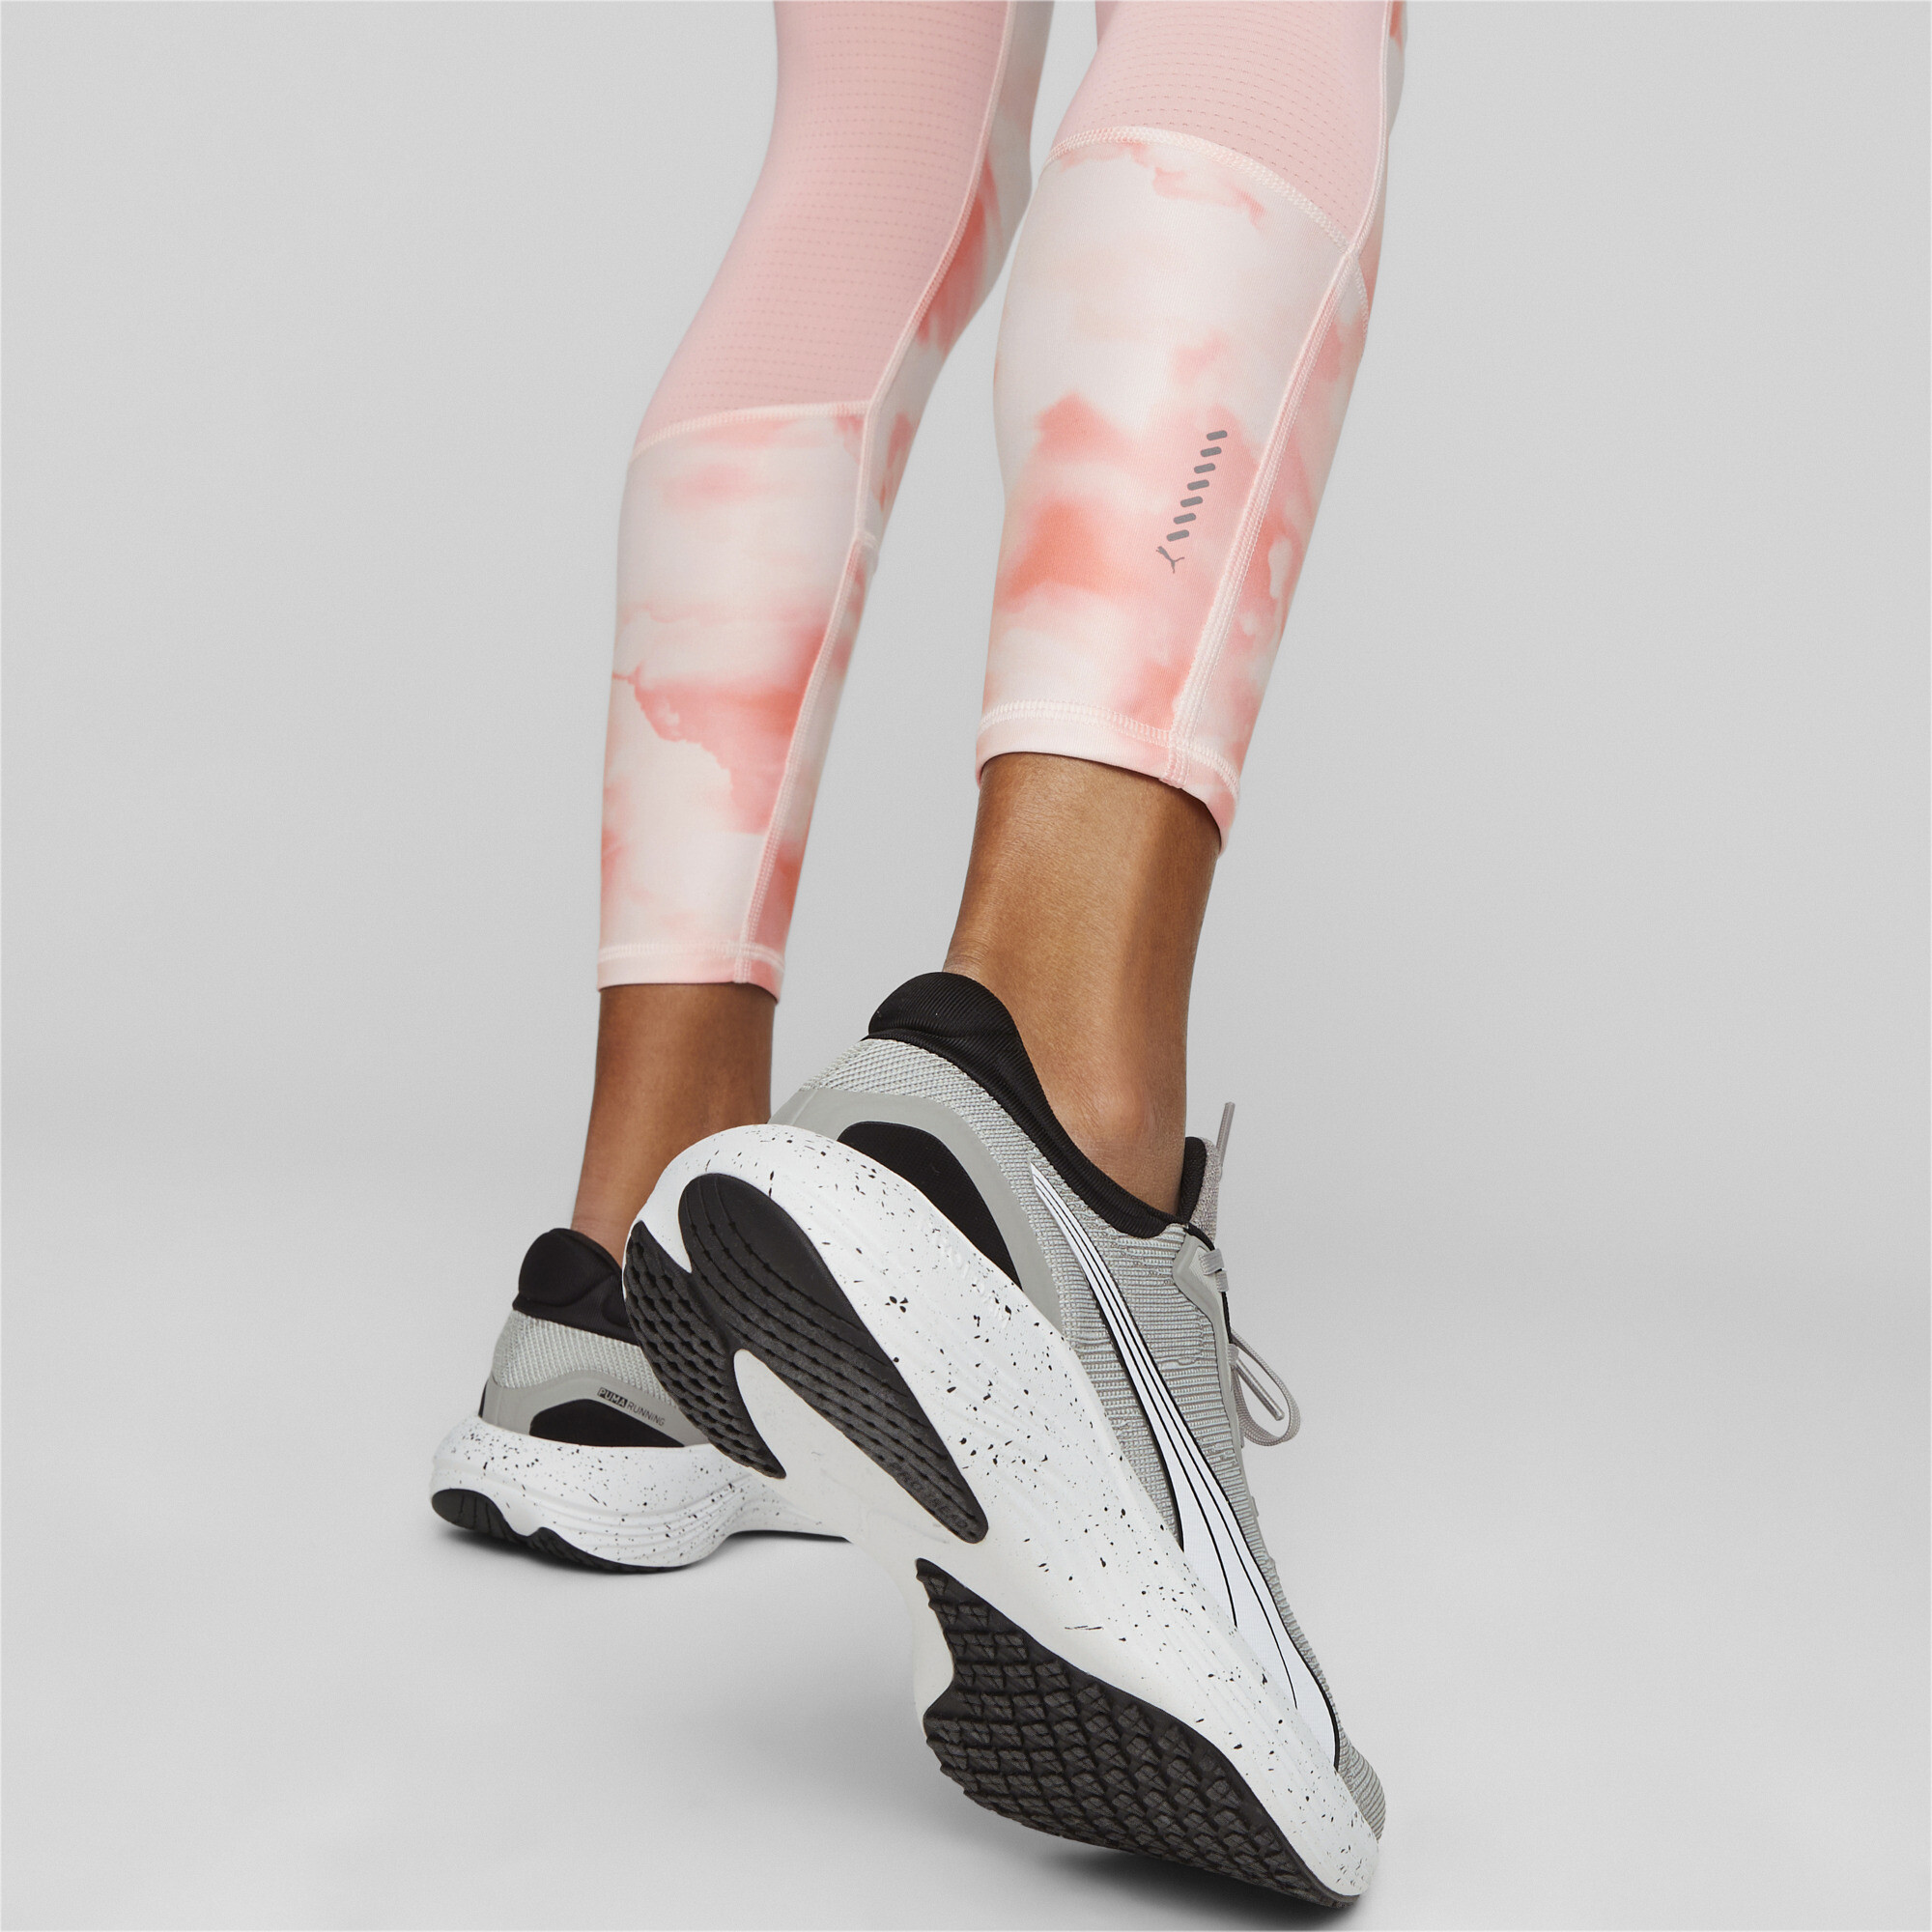 Women's Puma Run Favorite AOP 7/8's Tights, Pink, Size S, Clothing